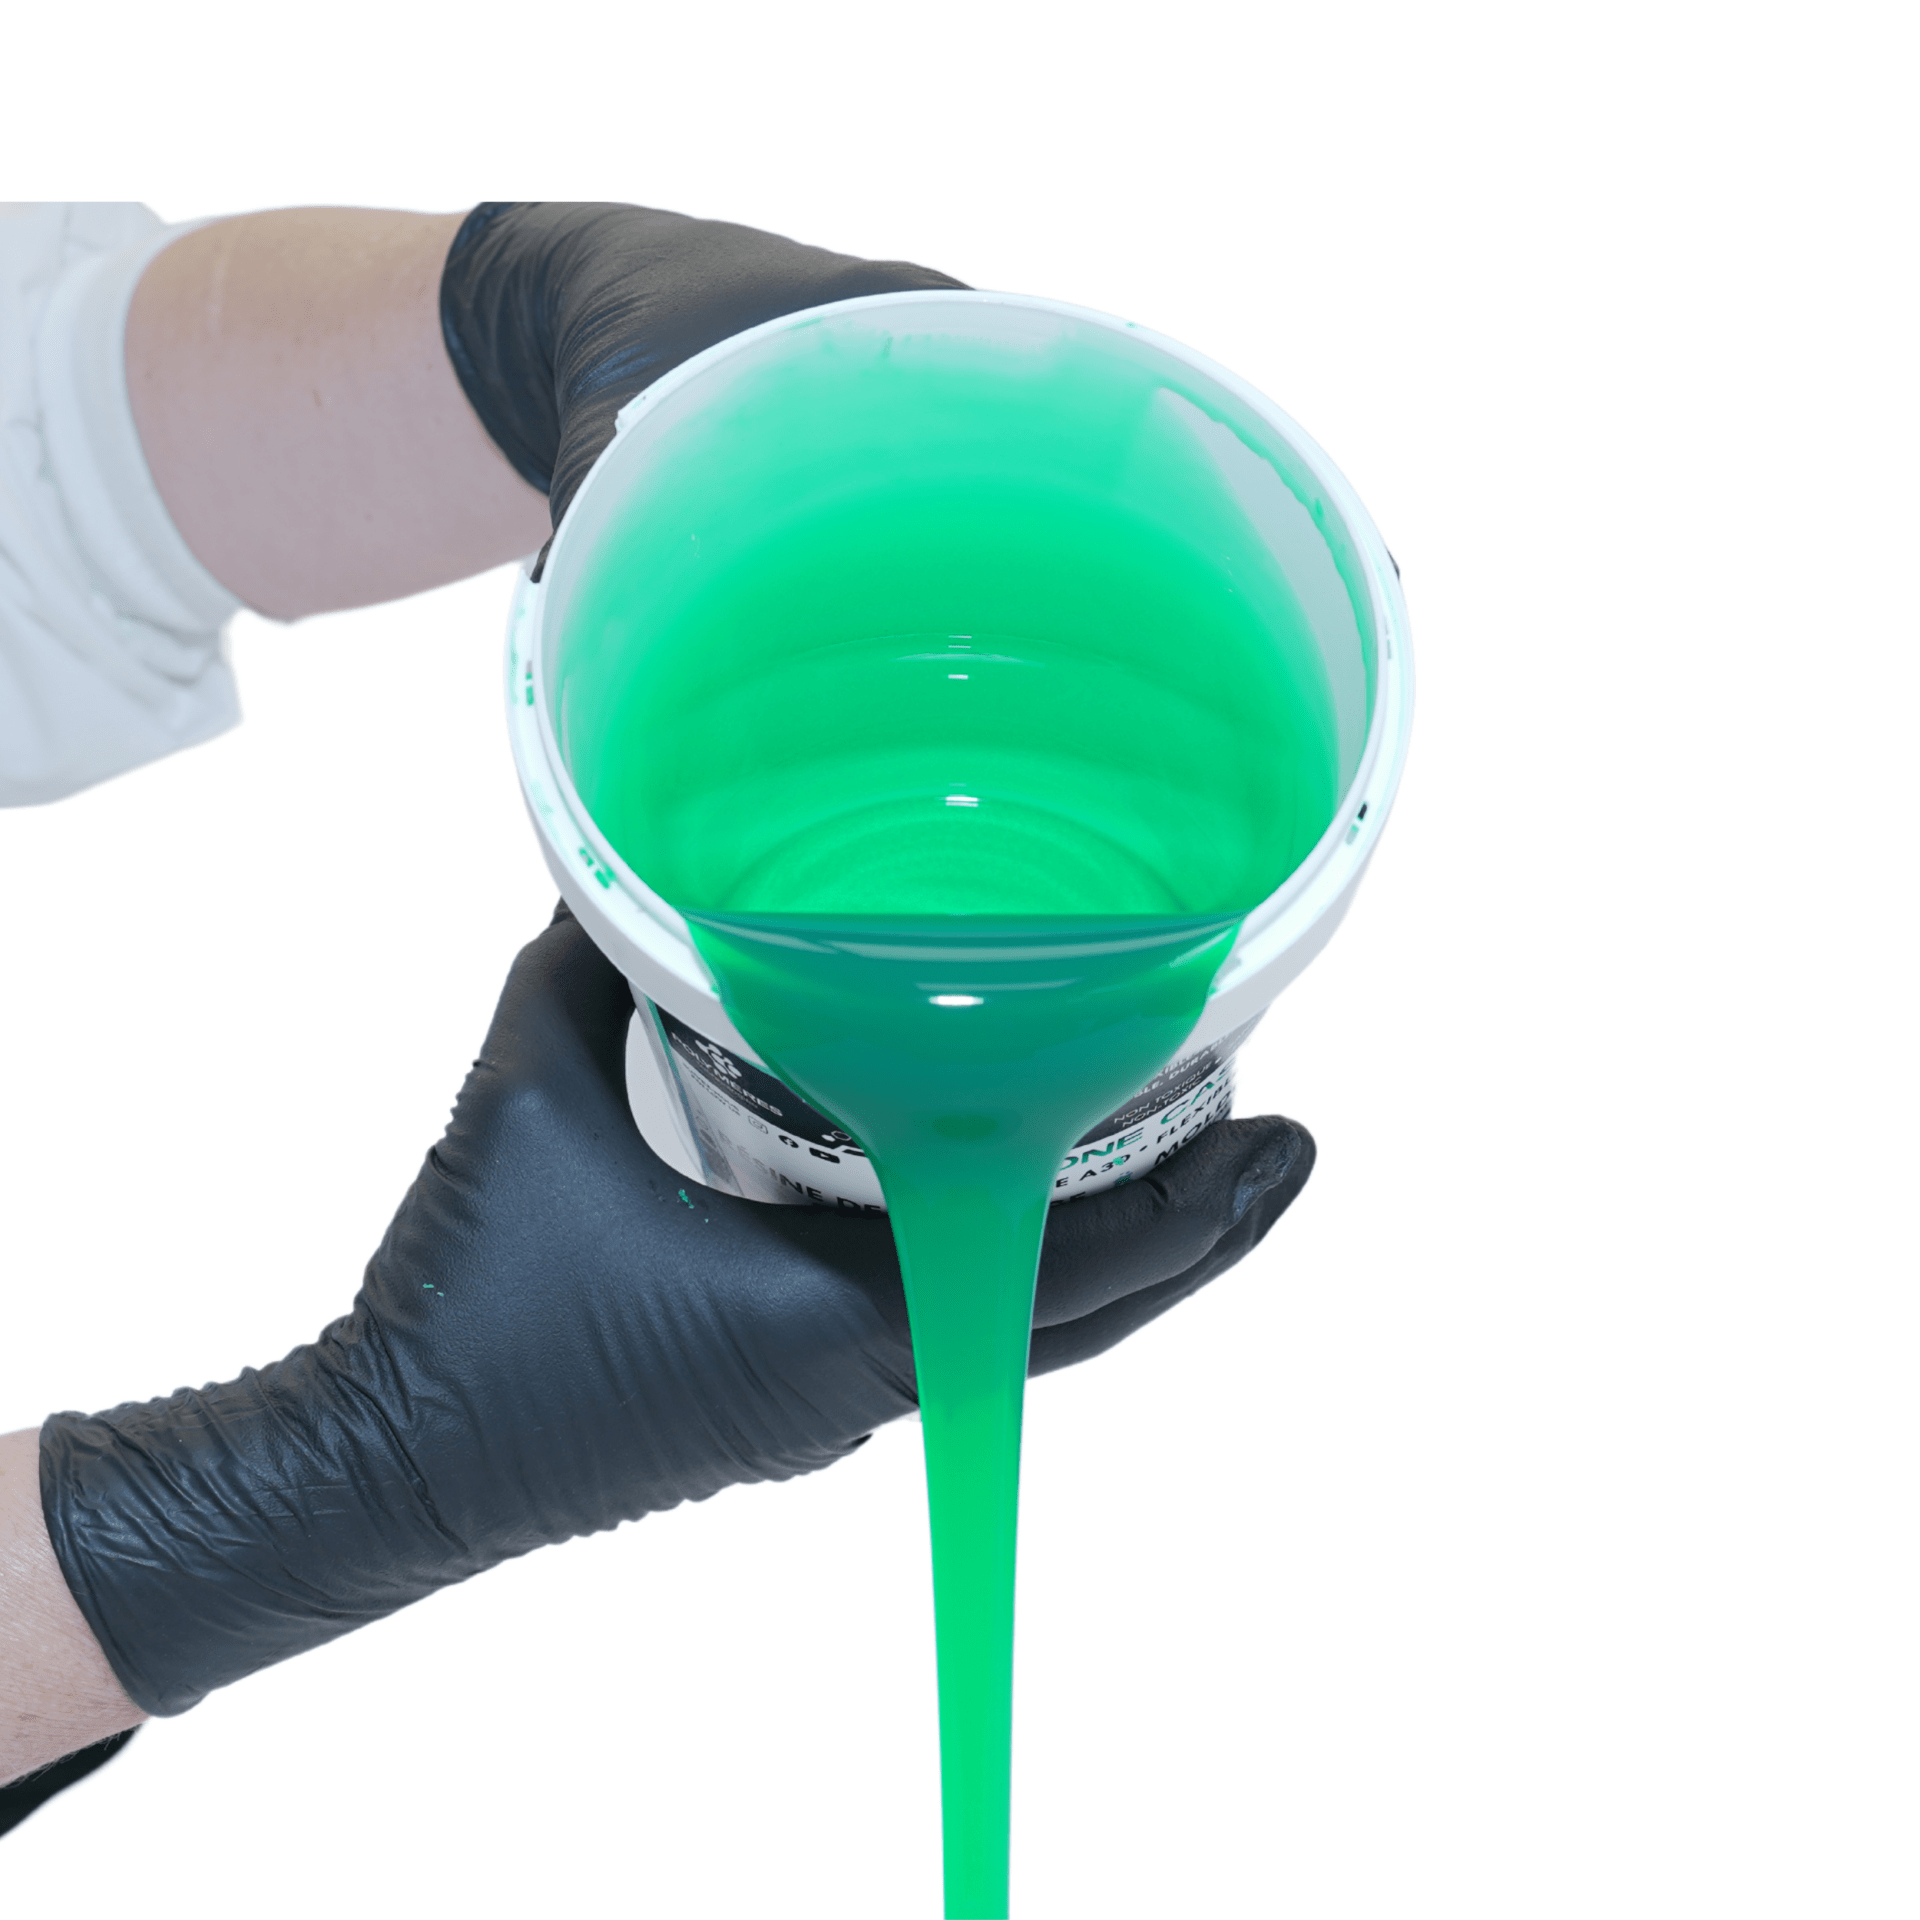 Platinum Cure Moldmaking Silicone Rubber